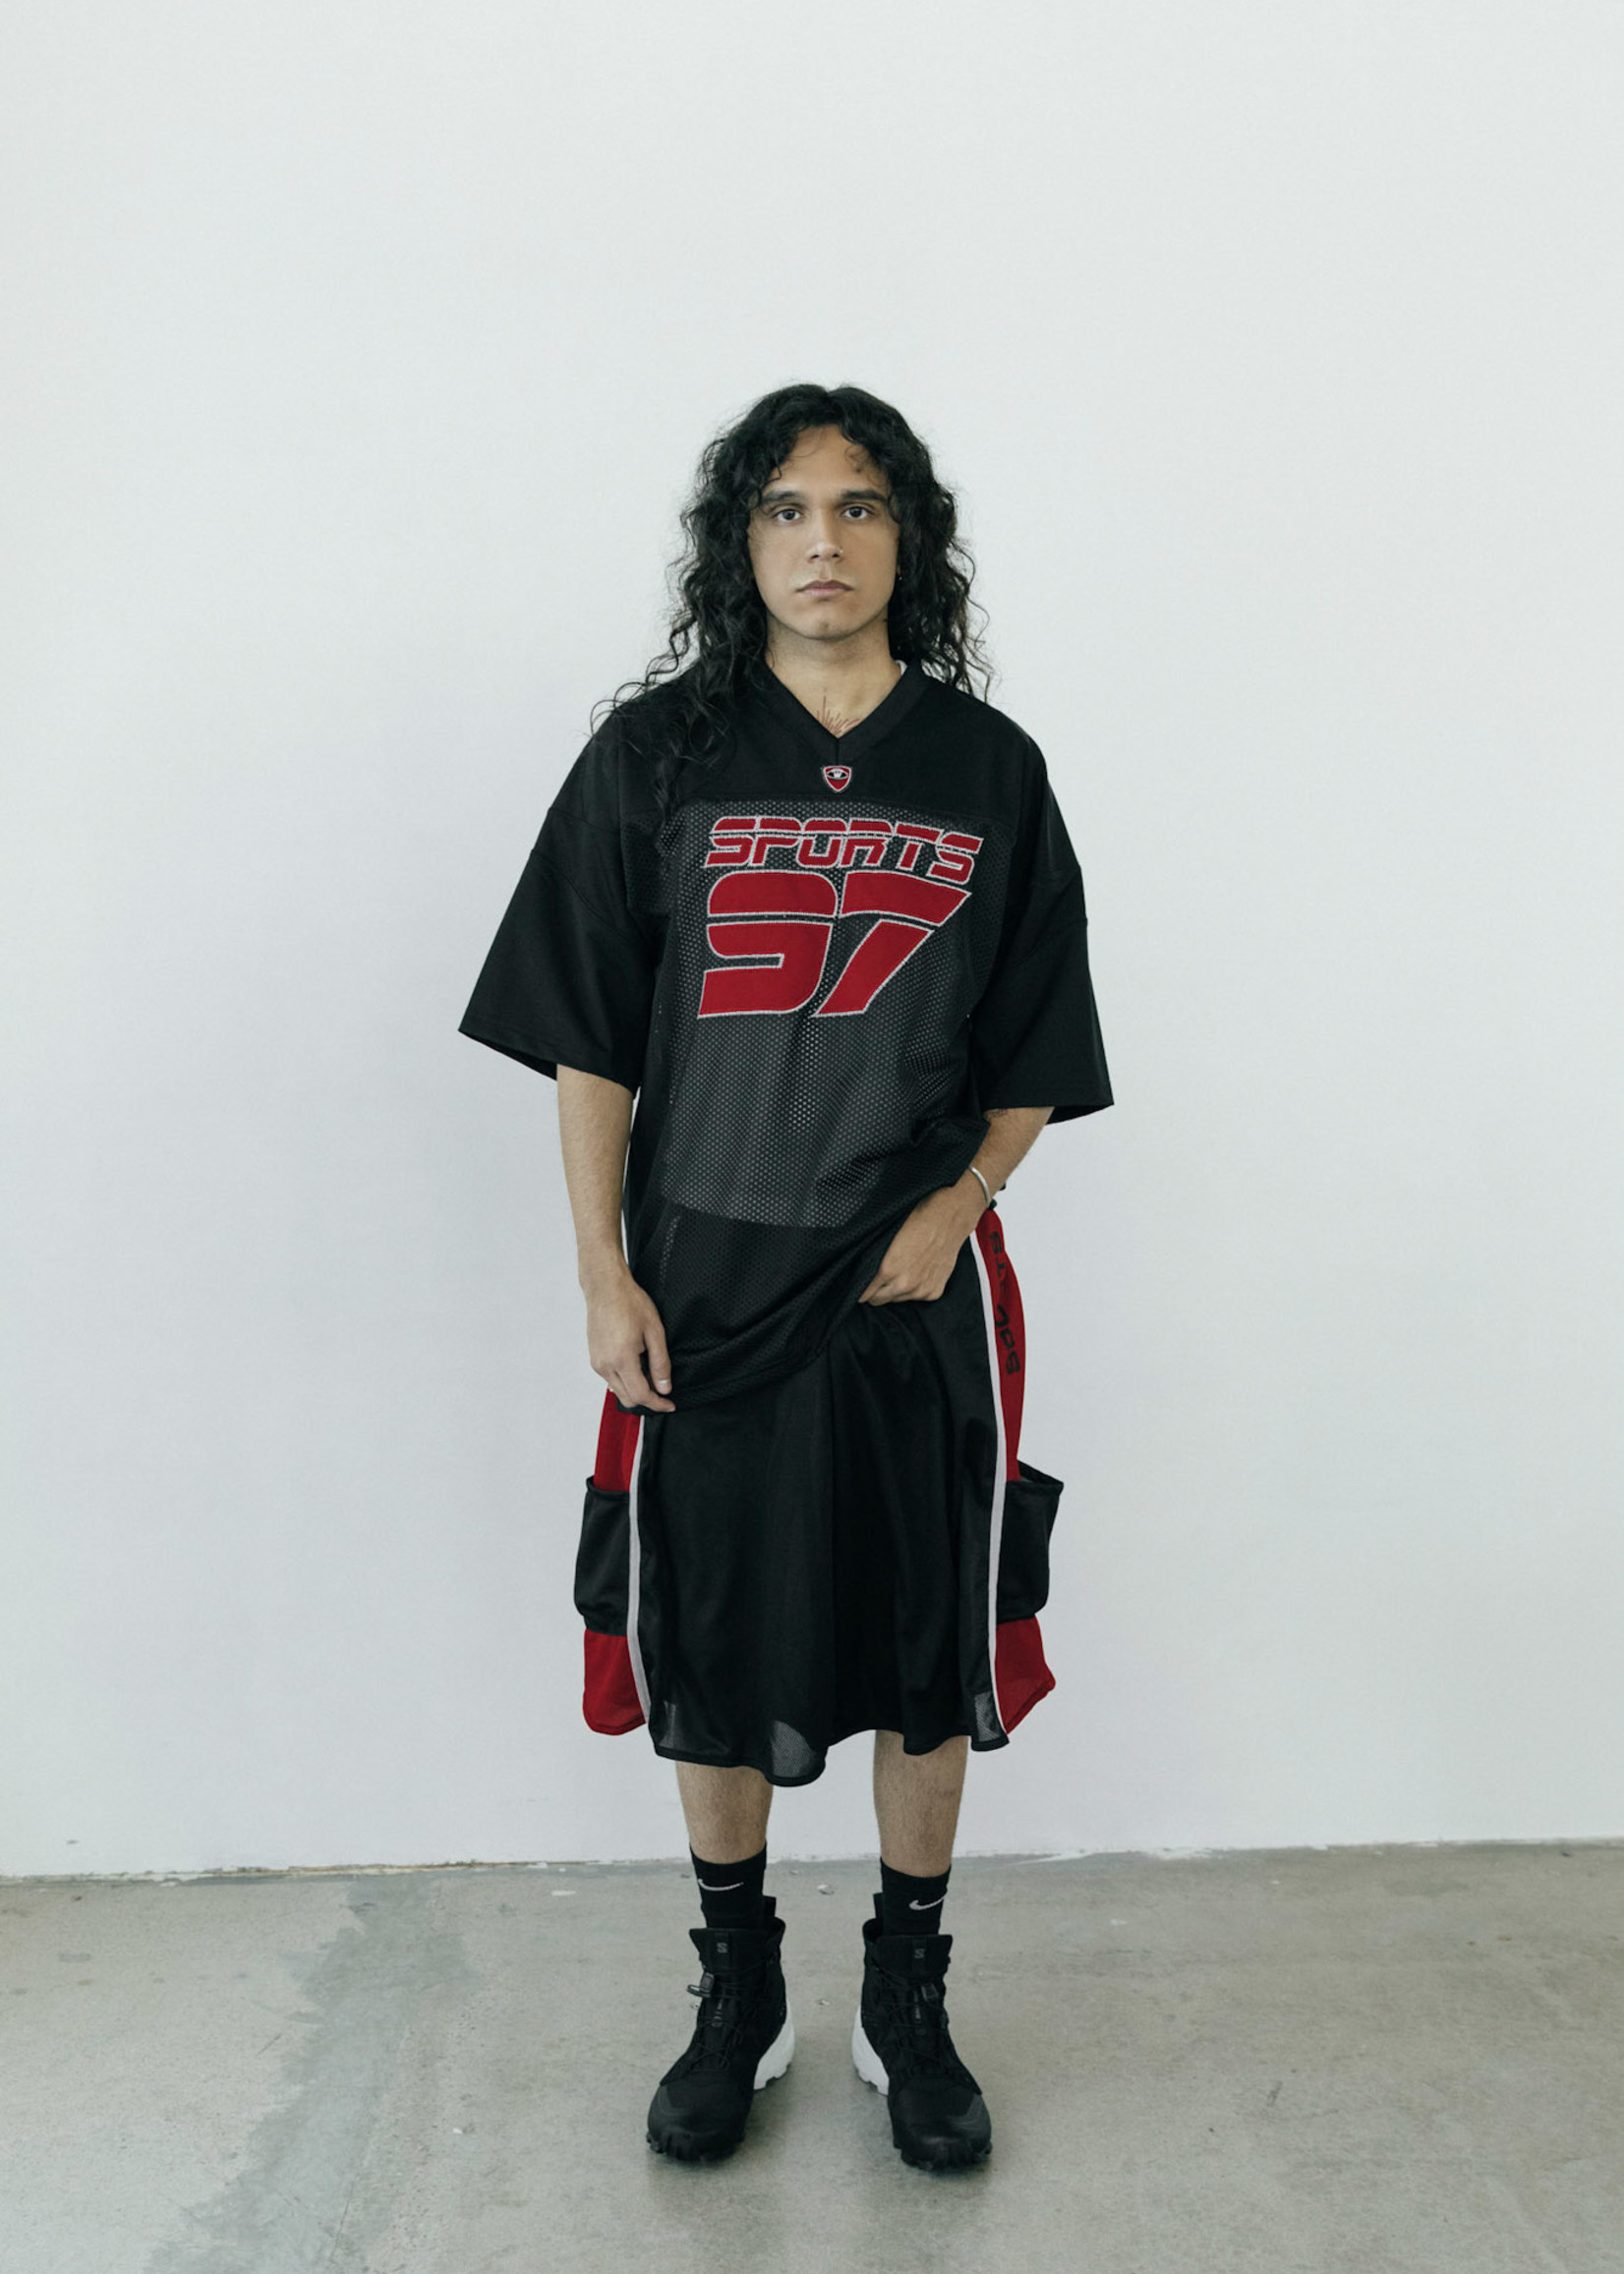 WILLY CHAVARRIA Sports 97 Jersey in Black